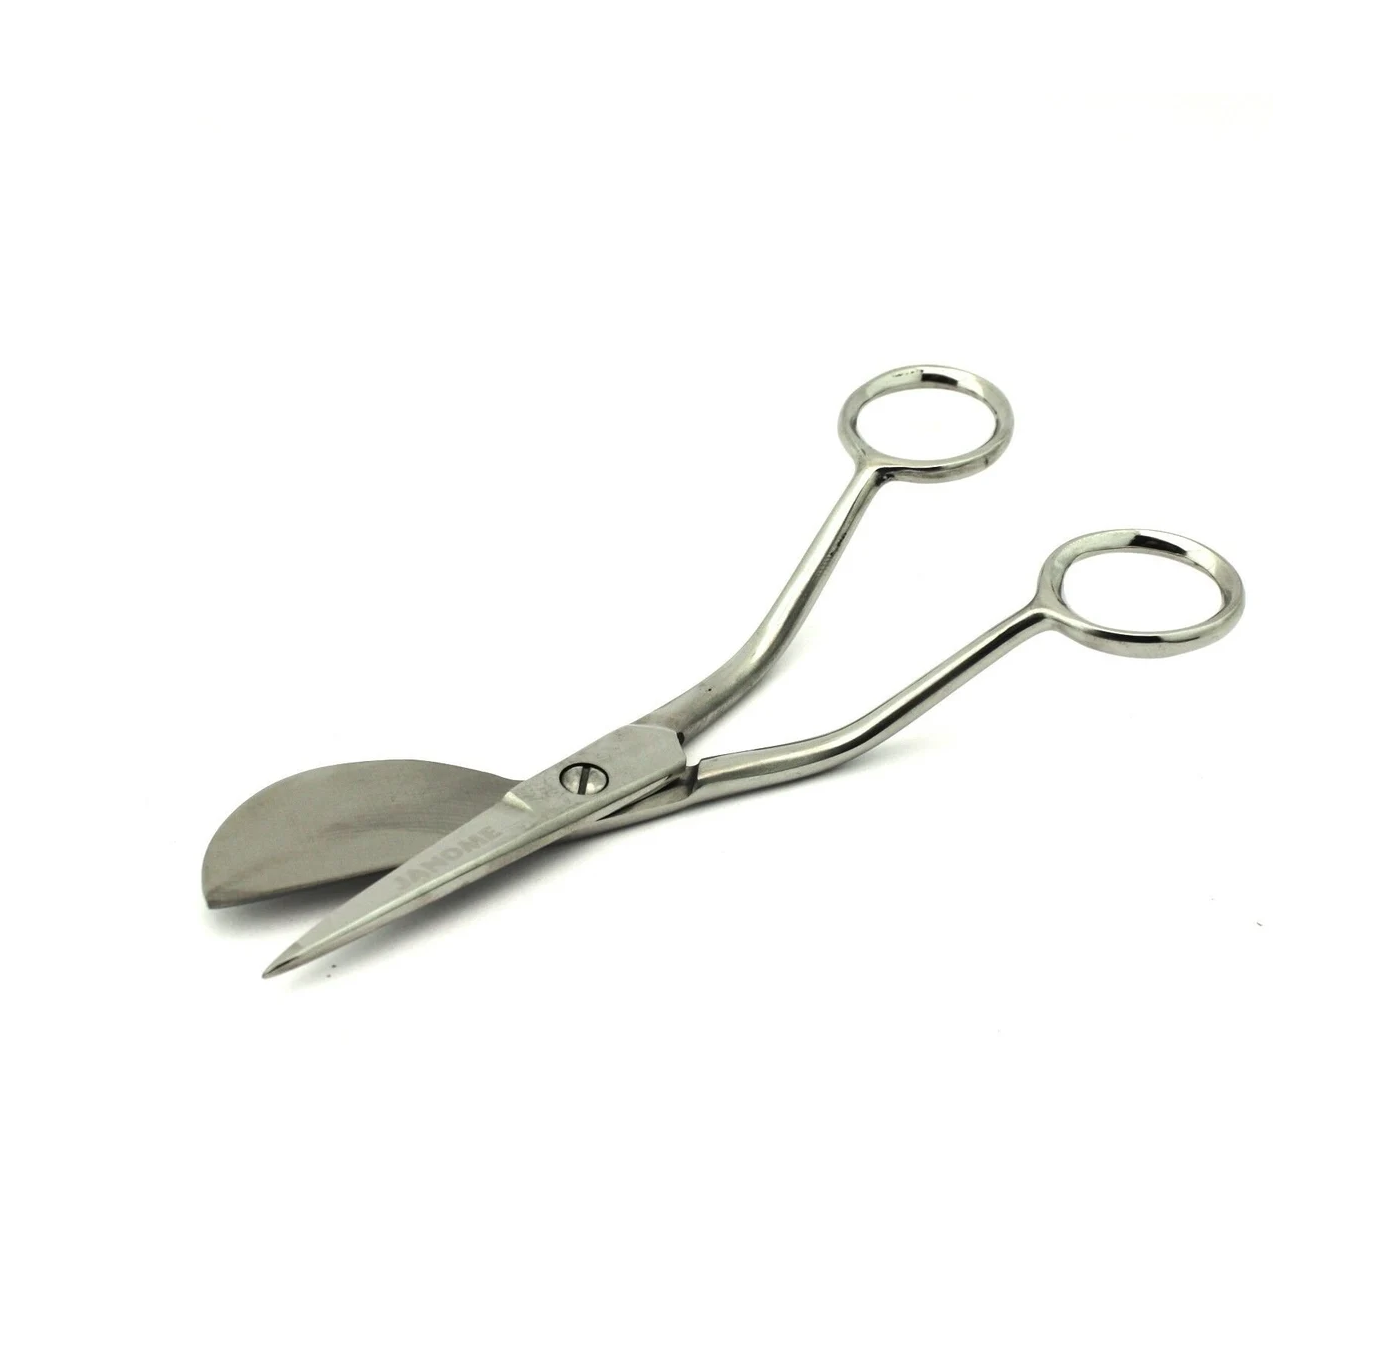 Janome 6" Half Moon Applique Scissors for Sale at World Weidner